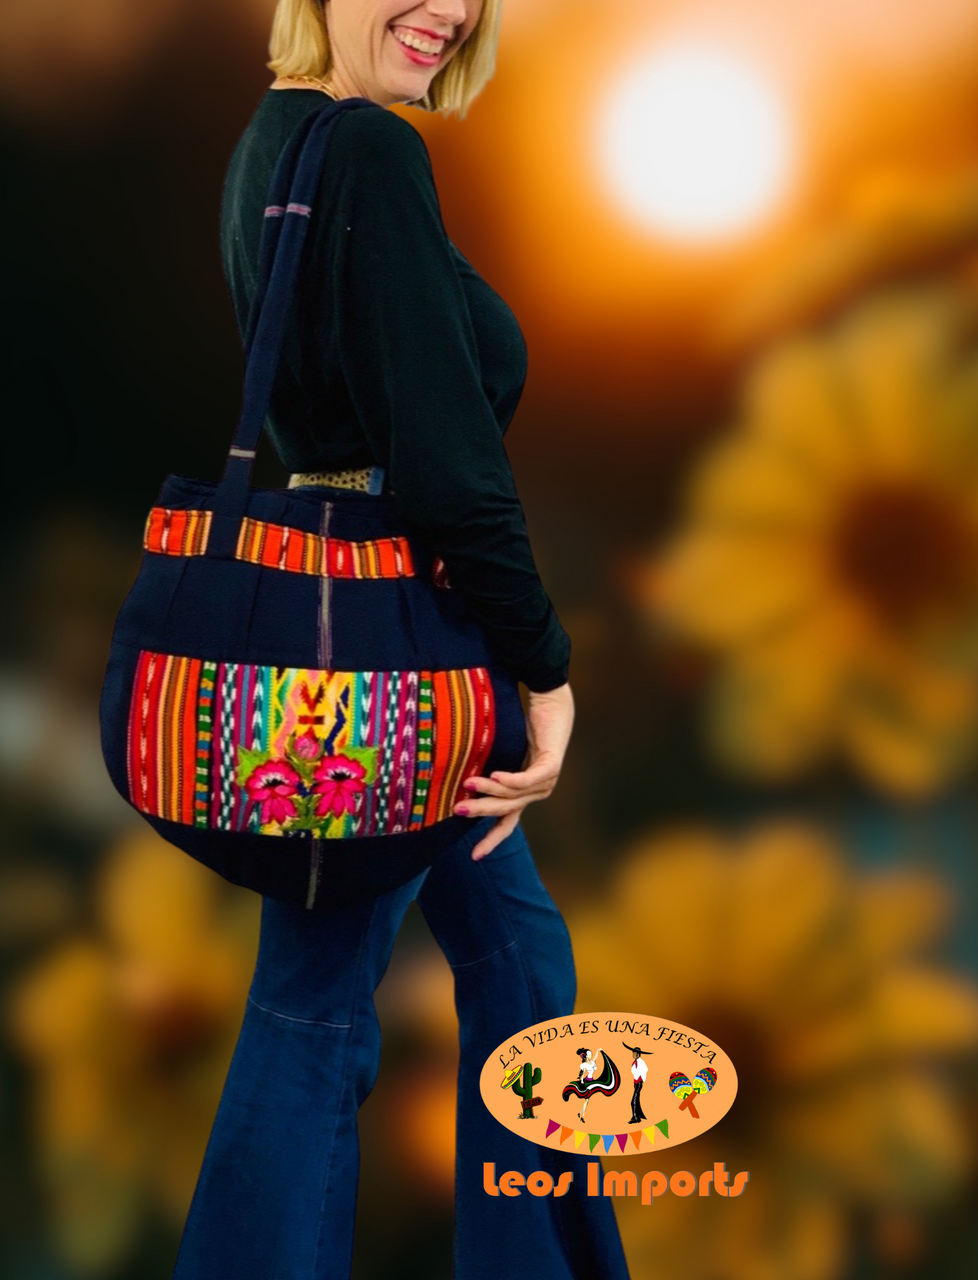 Showing in Hand Women S Clutches Evening Bag Handbag and Flower Design and  Green Leaves on the Background Photo Image Stock Photo - Image of  beautiful, showing: 230535358